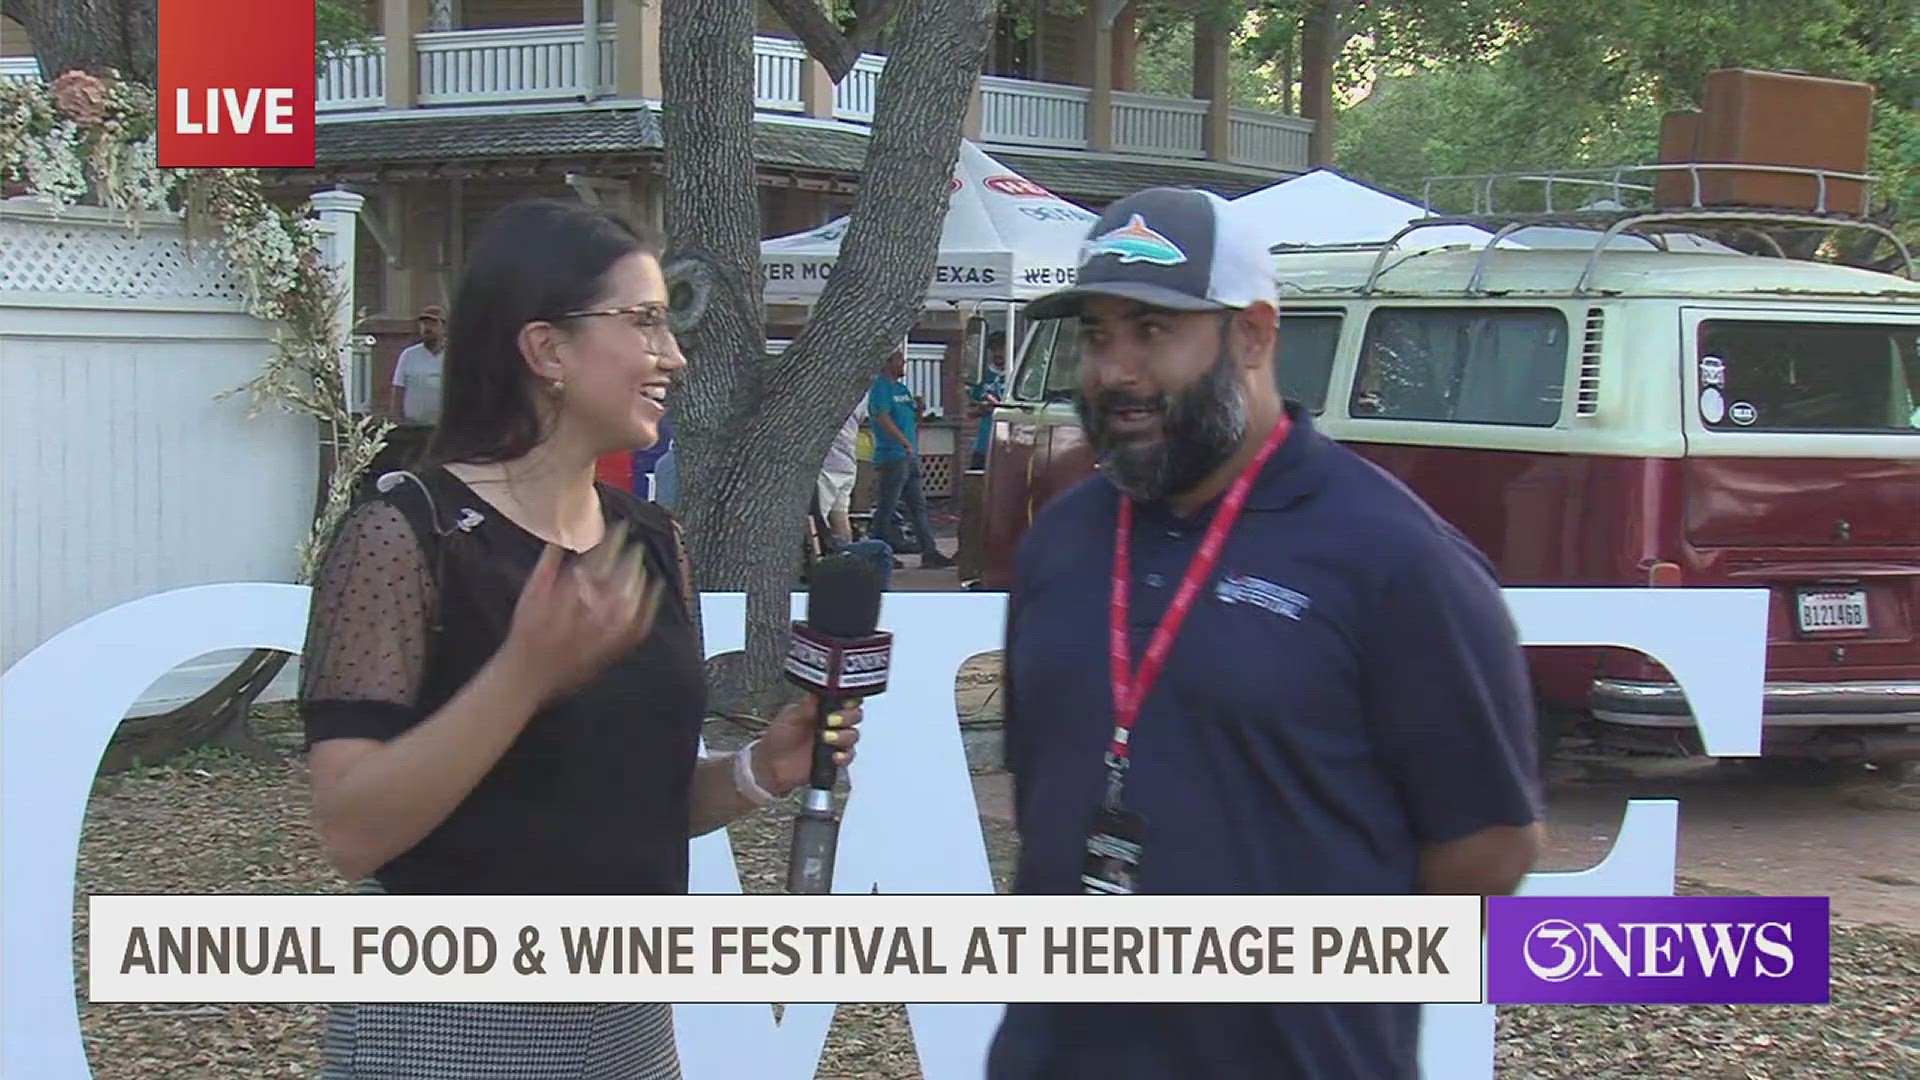 No more tickets are left at the Corpus Christi Wine Festival, which organizers said is a "good problem to have."